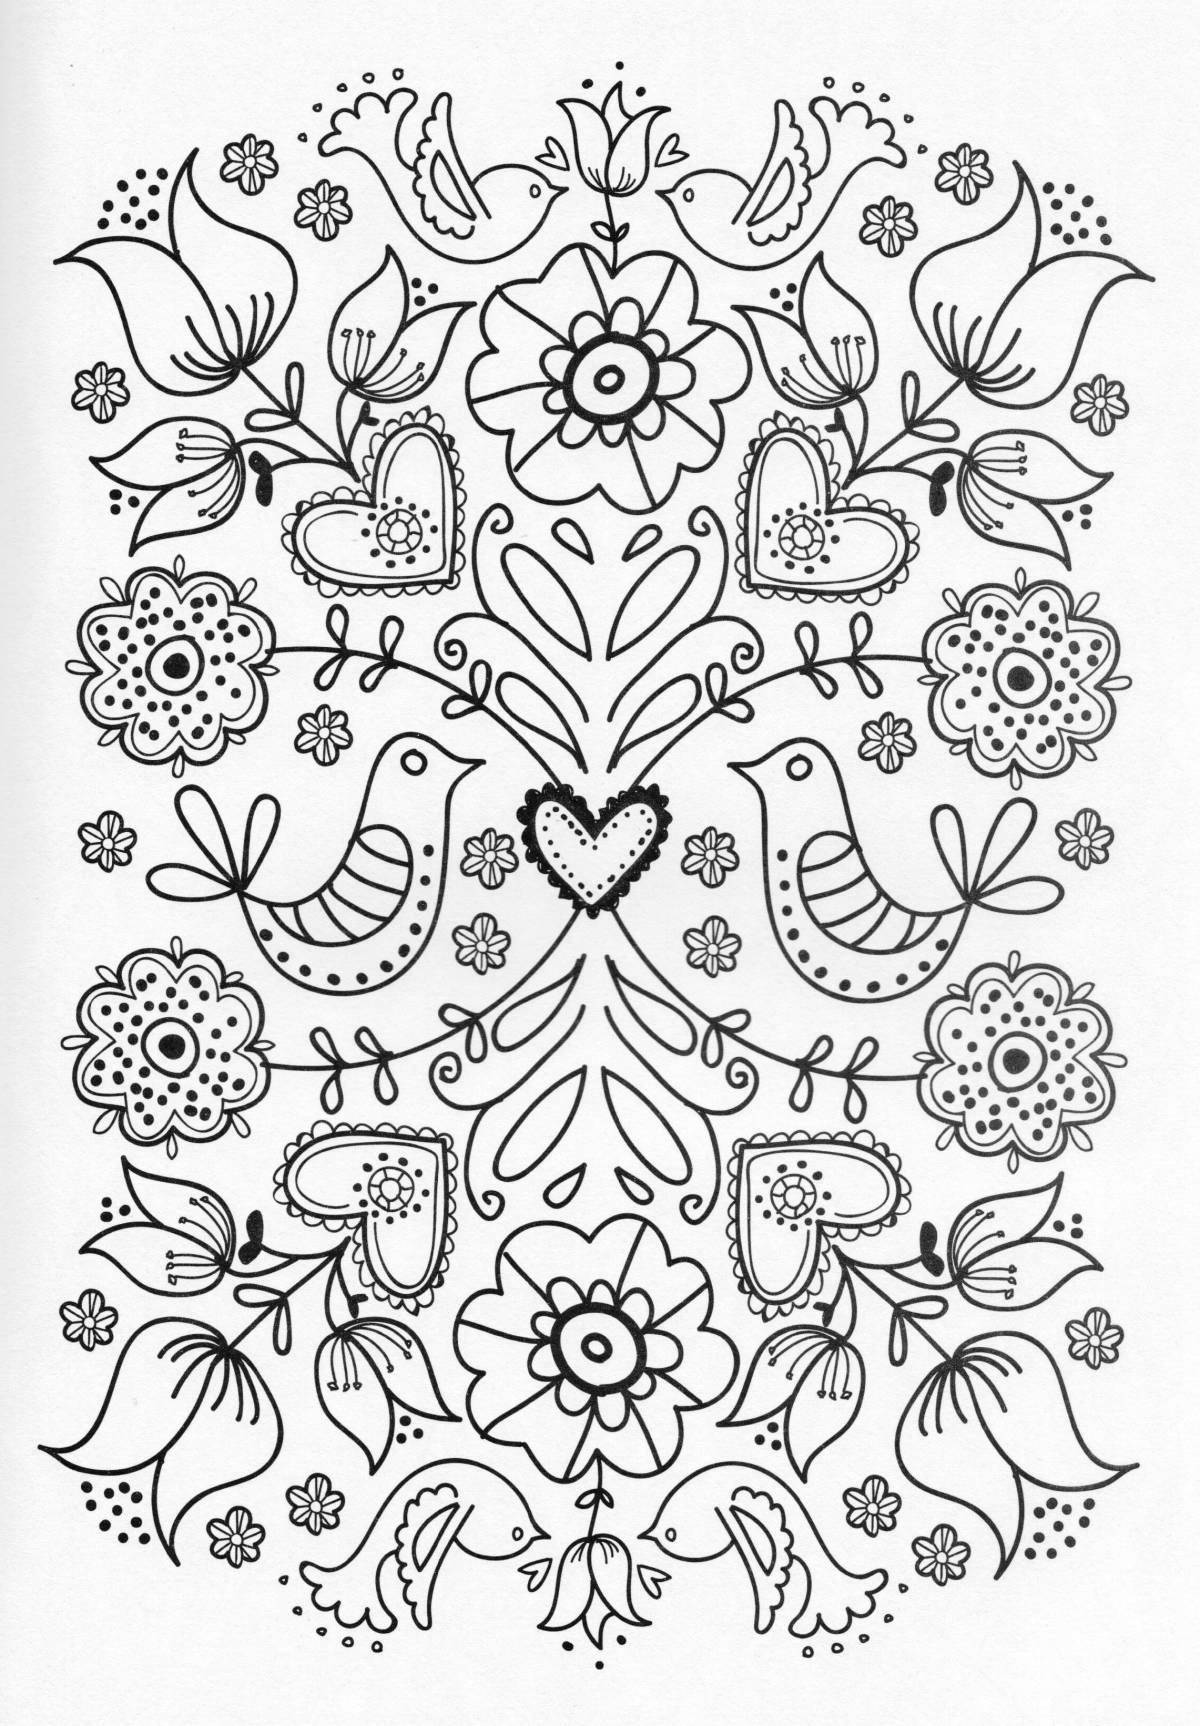 Fancy coloring page ornament